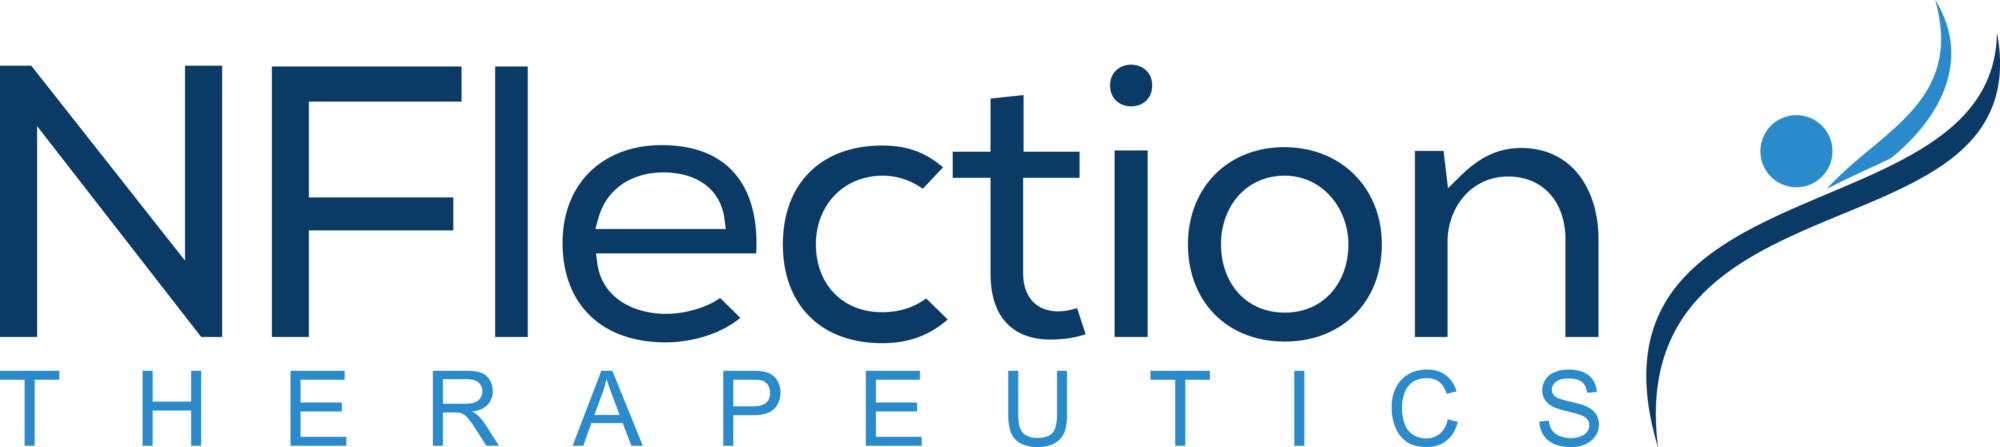 Logo of nflection therapeutics in blue color palette.